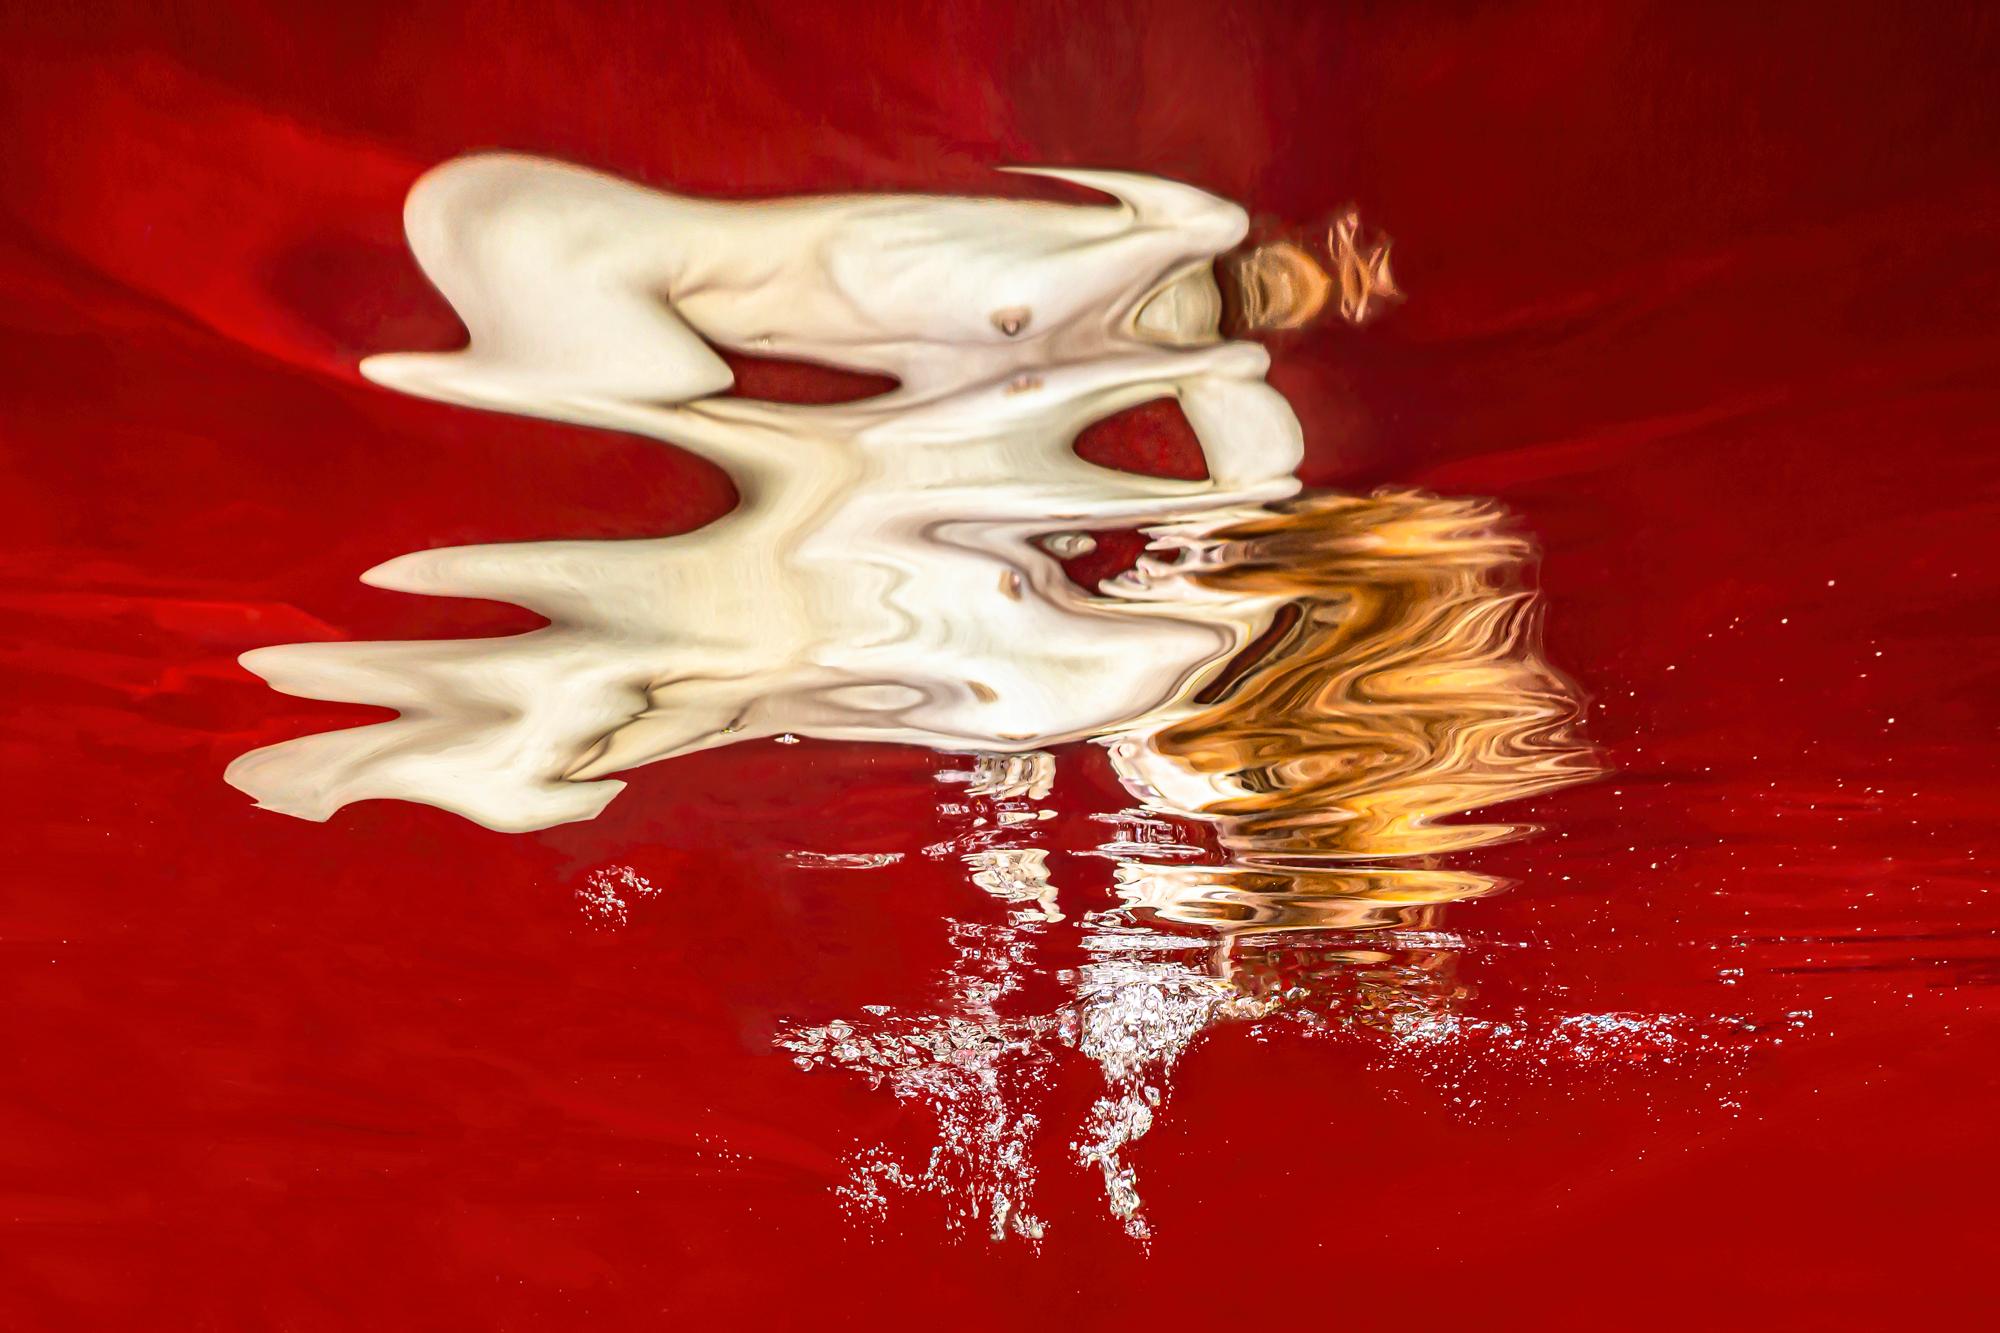 Alex Sher Nude Photograph - Spark  - underwater nude photograph from series REFLECTIONS - print on aluminum